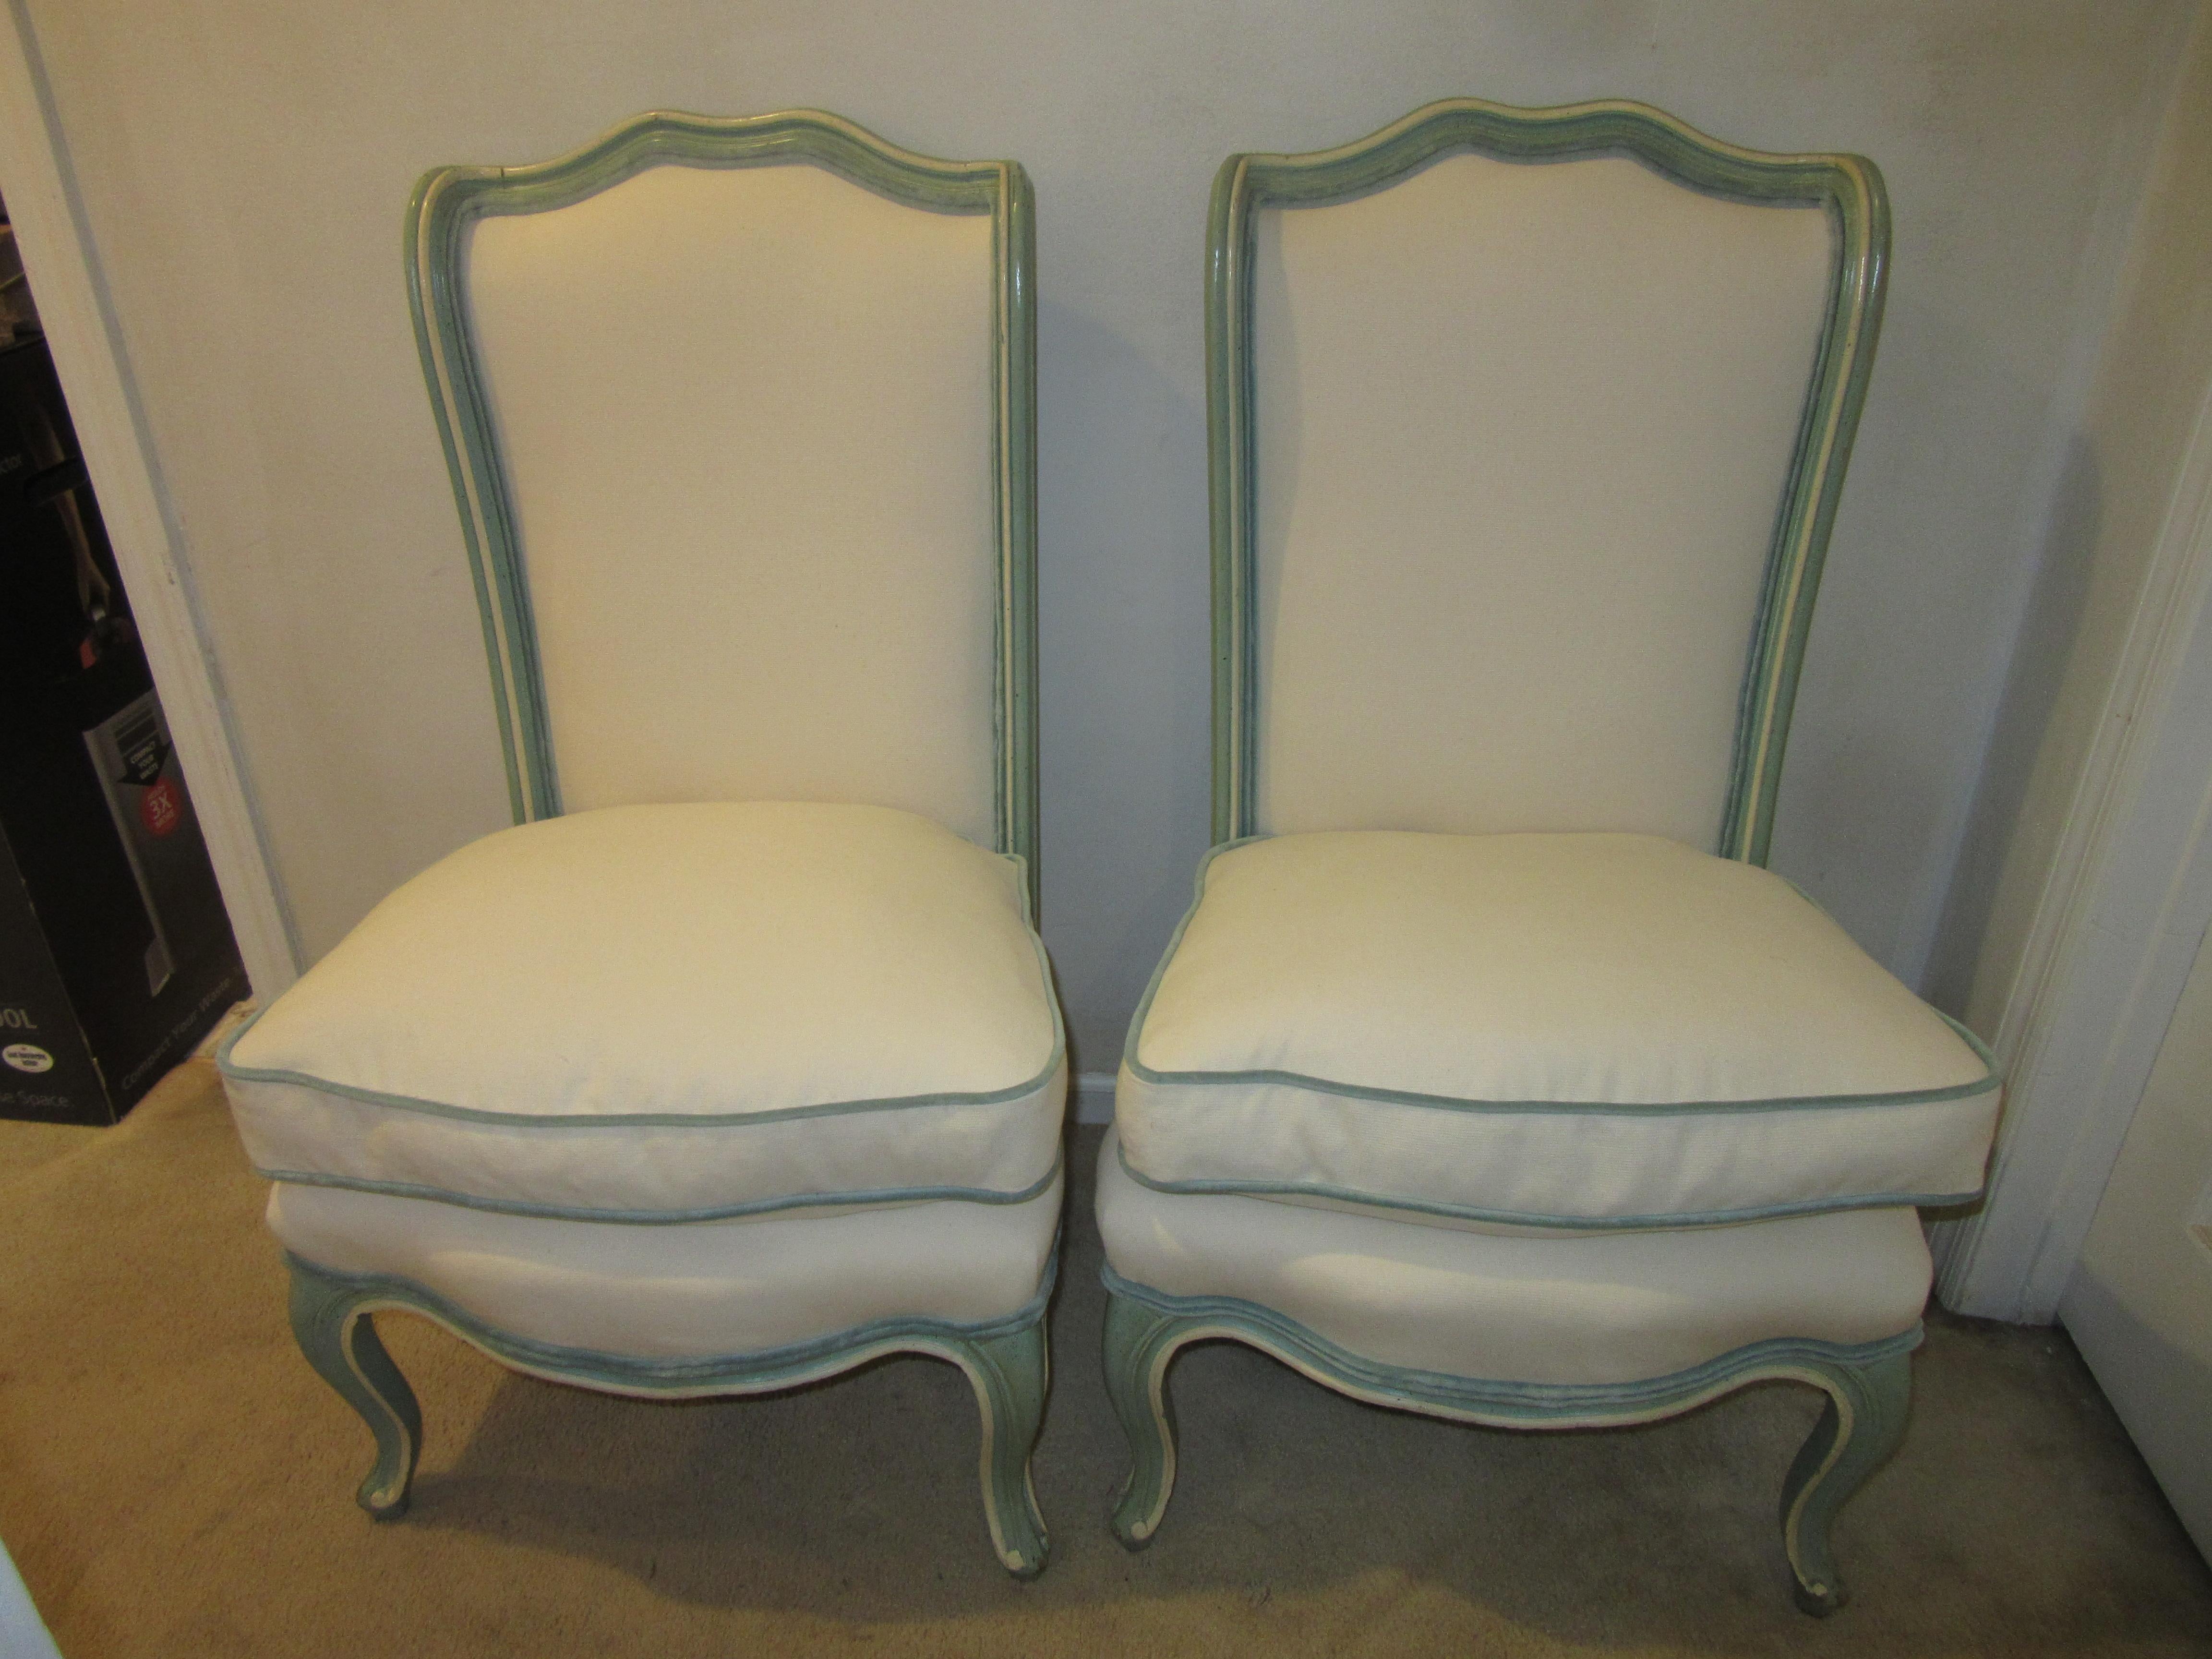 Hollywood Regency pair of robin's egg blue slipper chairs with white chenille upholstery, velvet cording, and matching leather backs. These chairs were recently reupholstered and are in very good vintage condition. There is some minor paint loss on